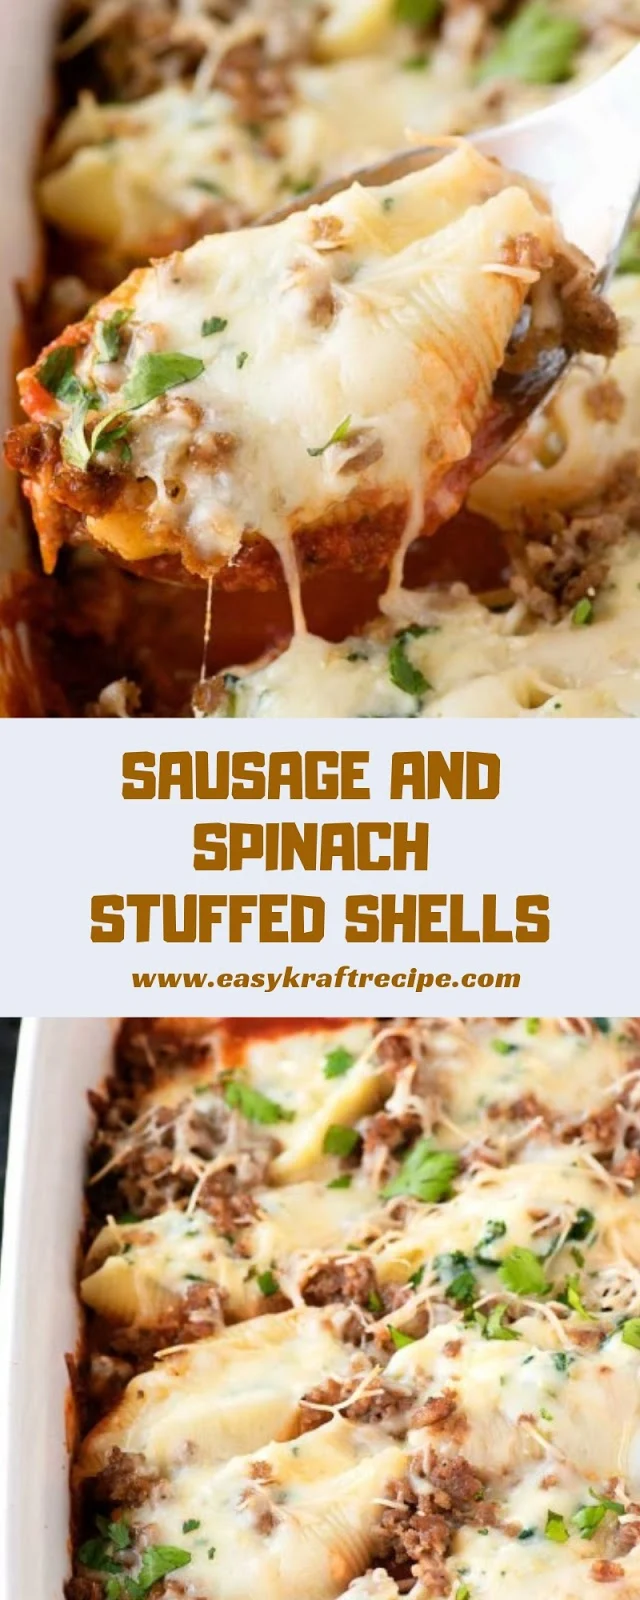 SAUSAGE AND SPINACH STUFFED SHELLS